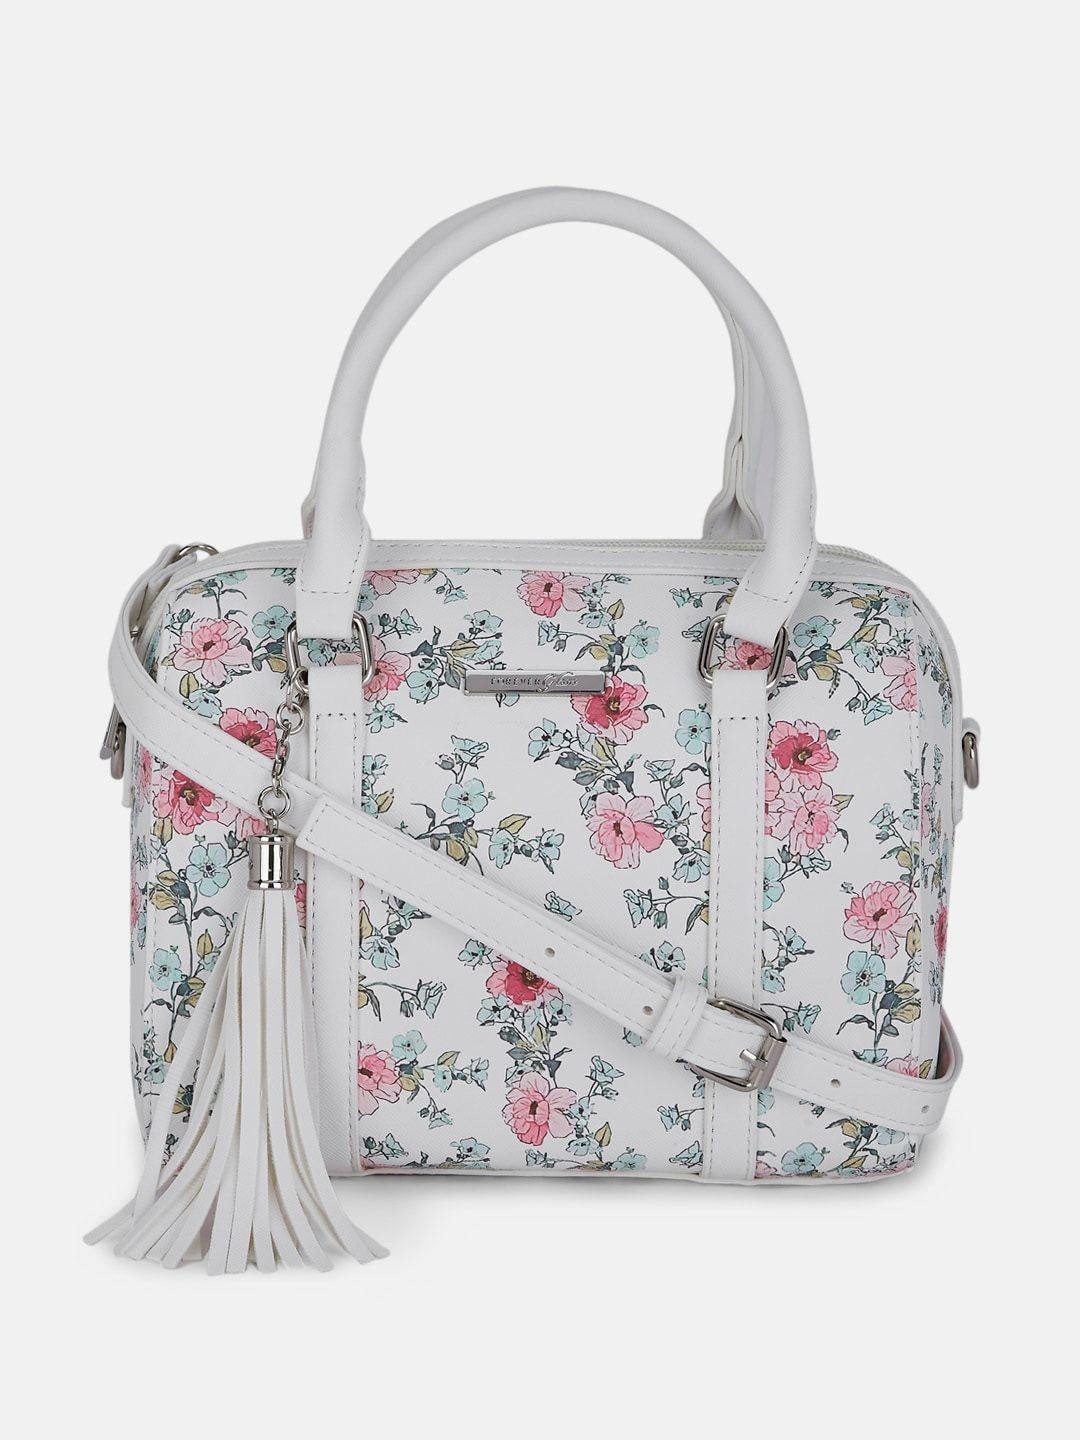 forever glam by pantaloons white floral printed structured handheld bag with tasselled